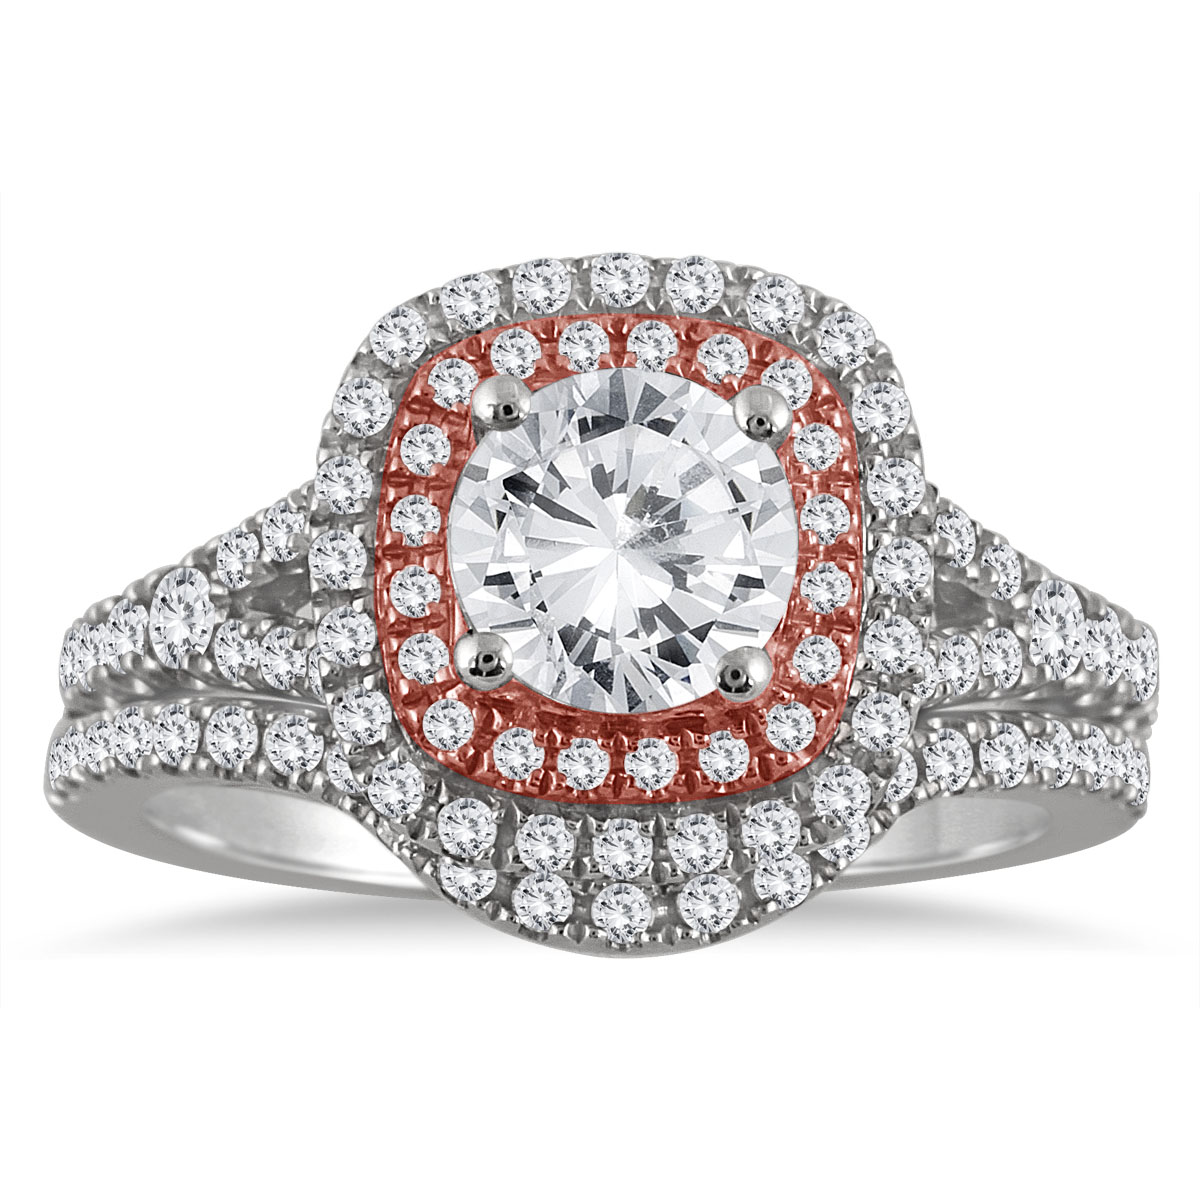 Image of AGS Certified 1 5/8 Carat TW Diamond Bridal Set in 14K Rose and White Gold (J-K Color I2-I3 Clarity)